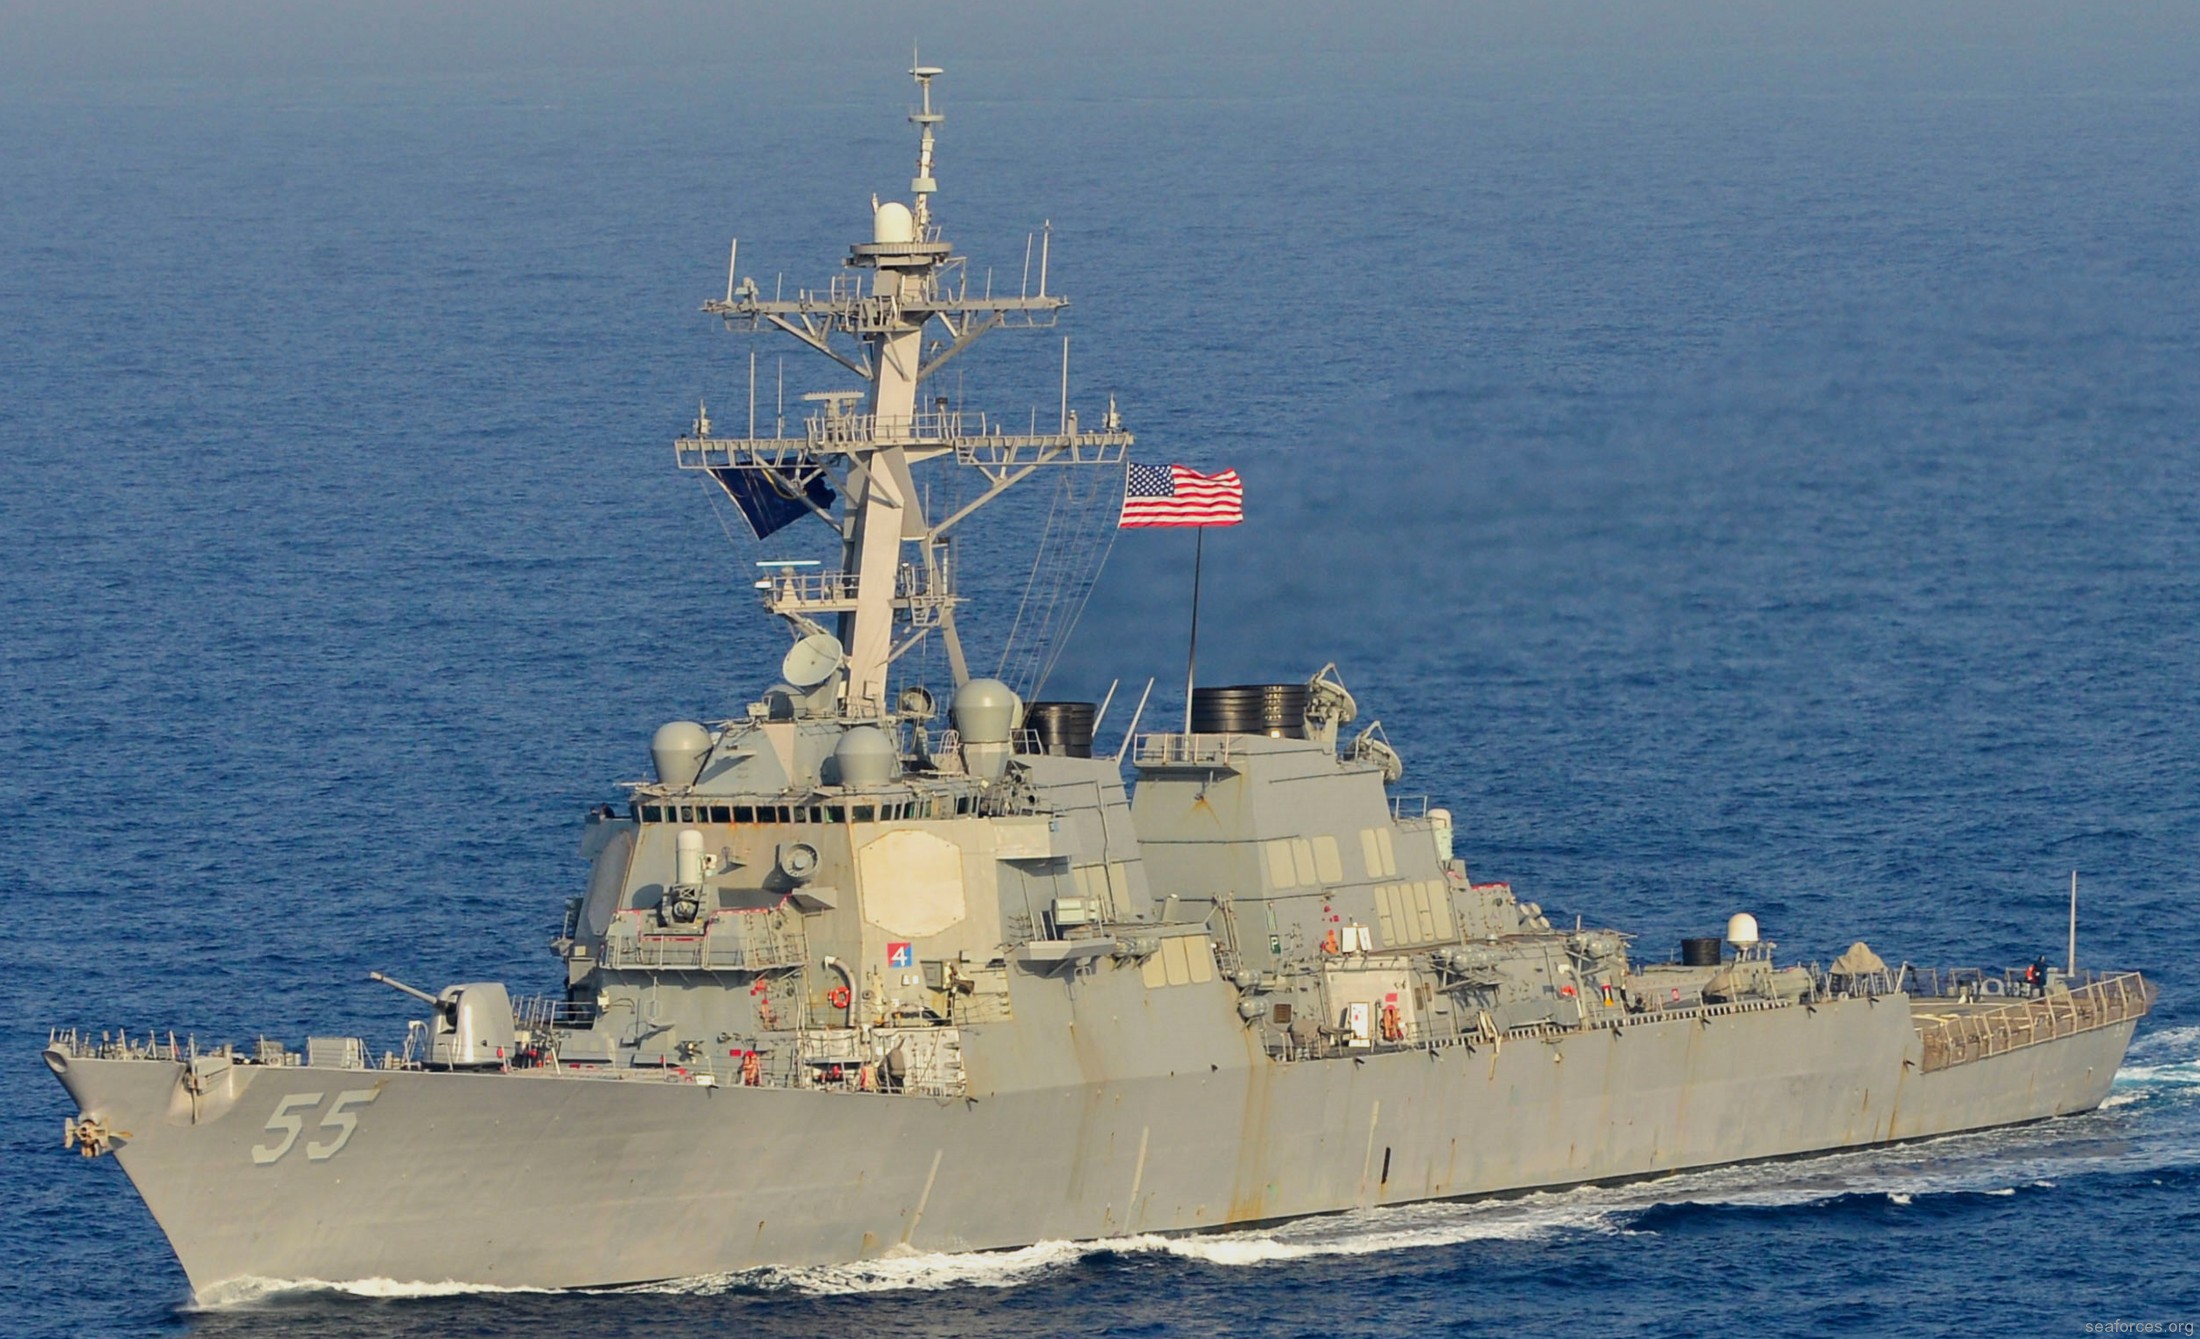 ddg-55 uss stout guided missile destroyer us navy 60 arleigh burke class